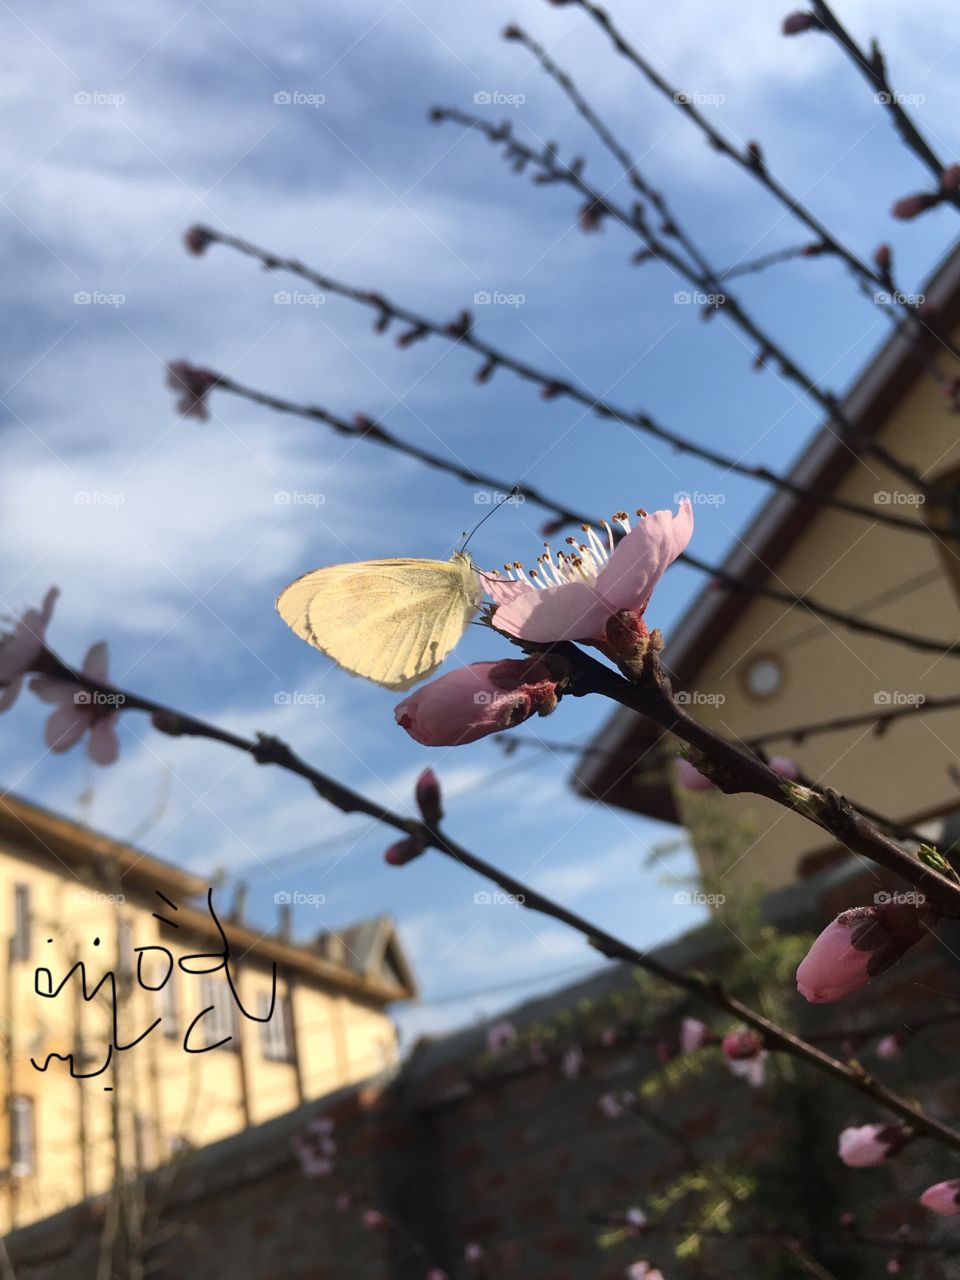 Spring ! Butterfly on peach blossom 